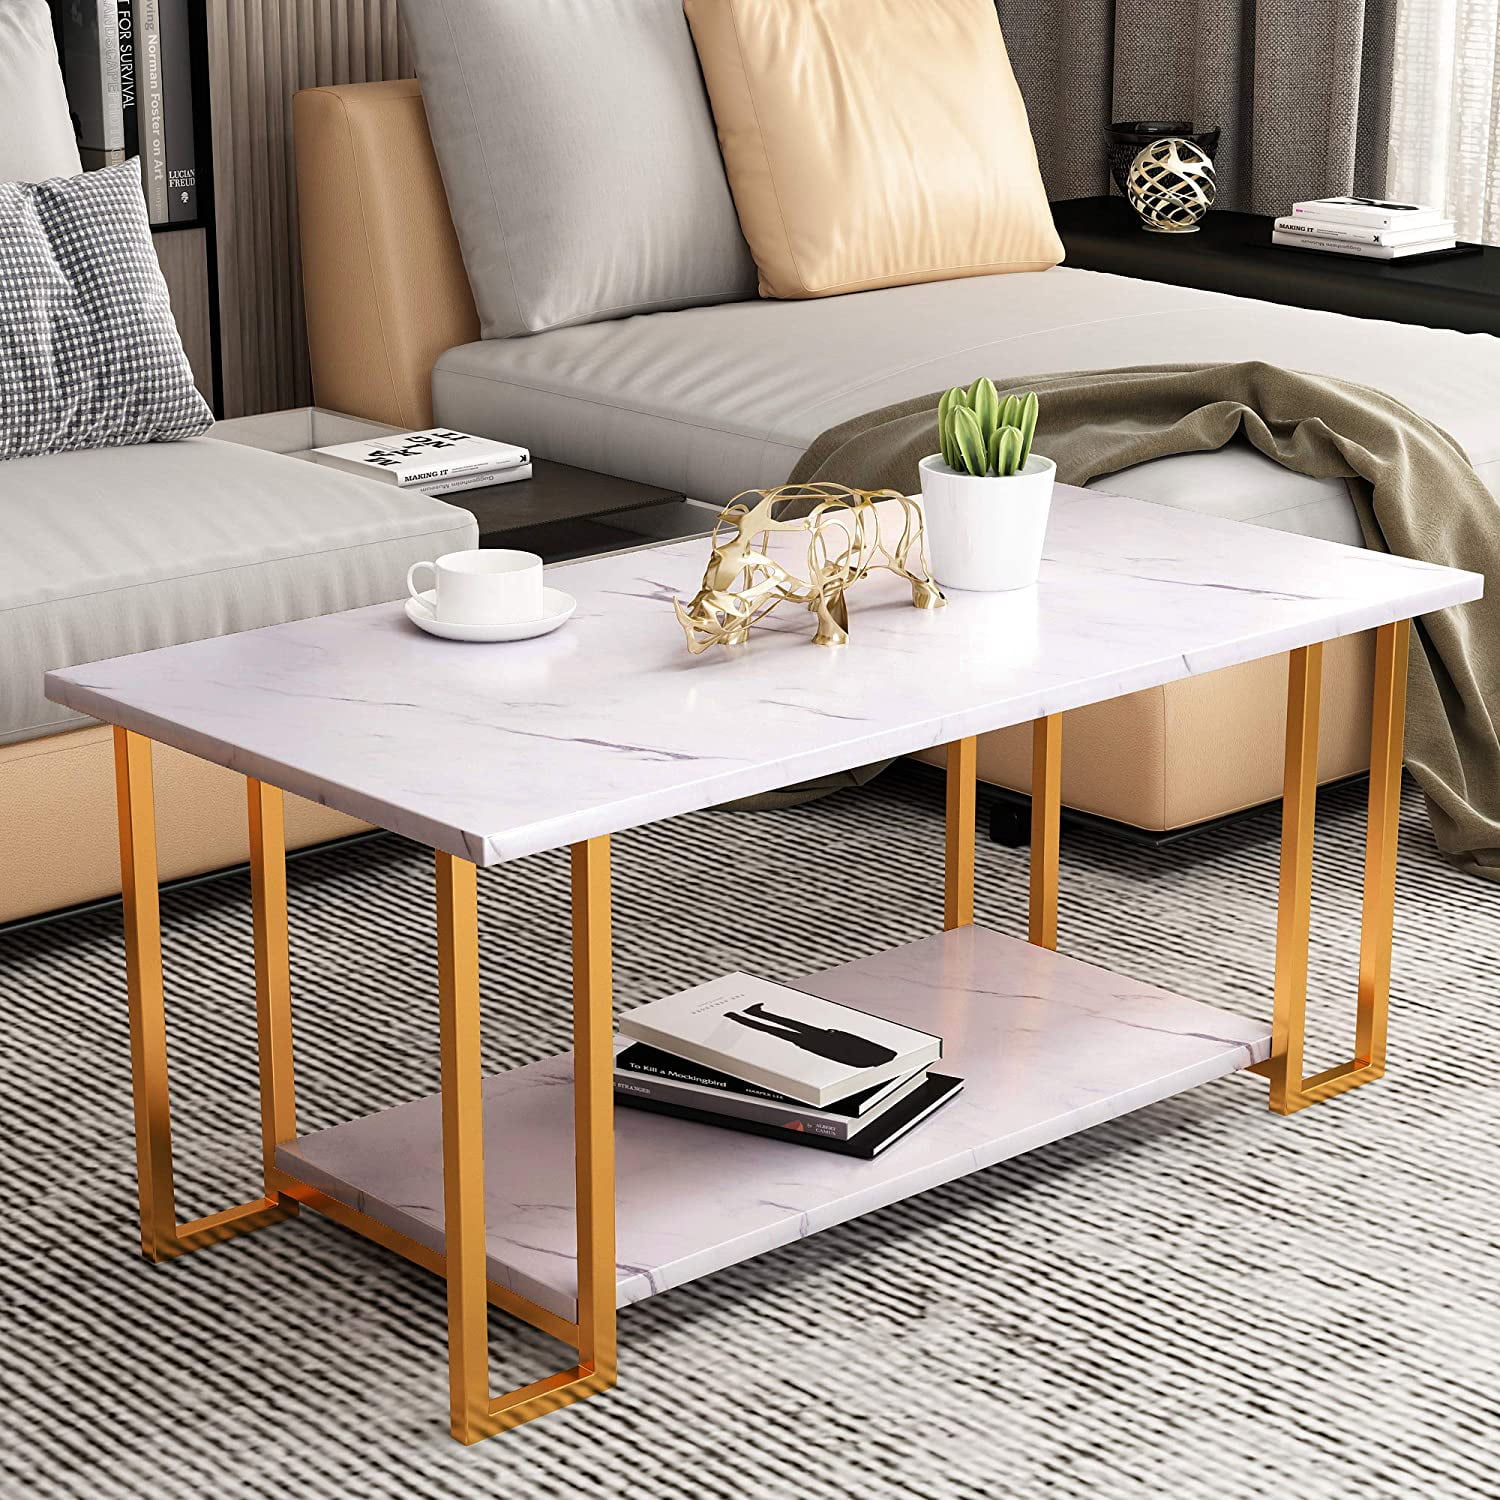 Details about   Coffee Table Accent Cocktail Table White Waterproof Top Living Room Furniture 